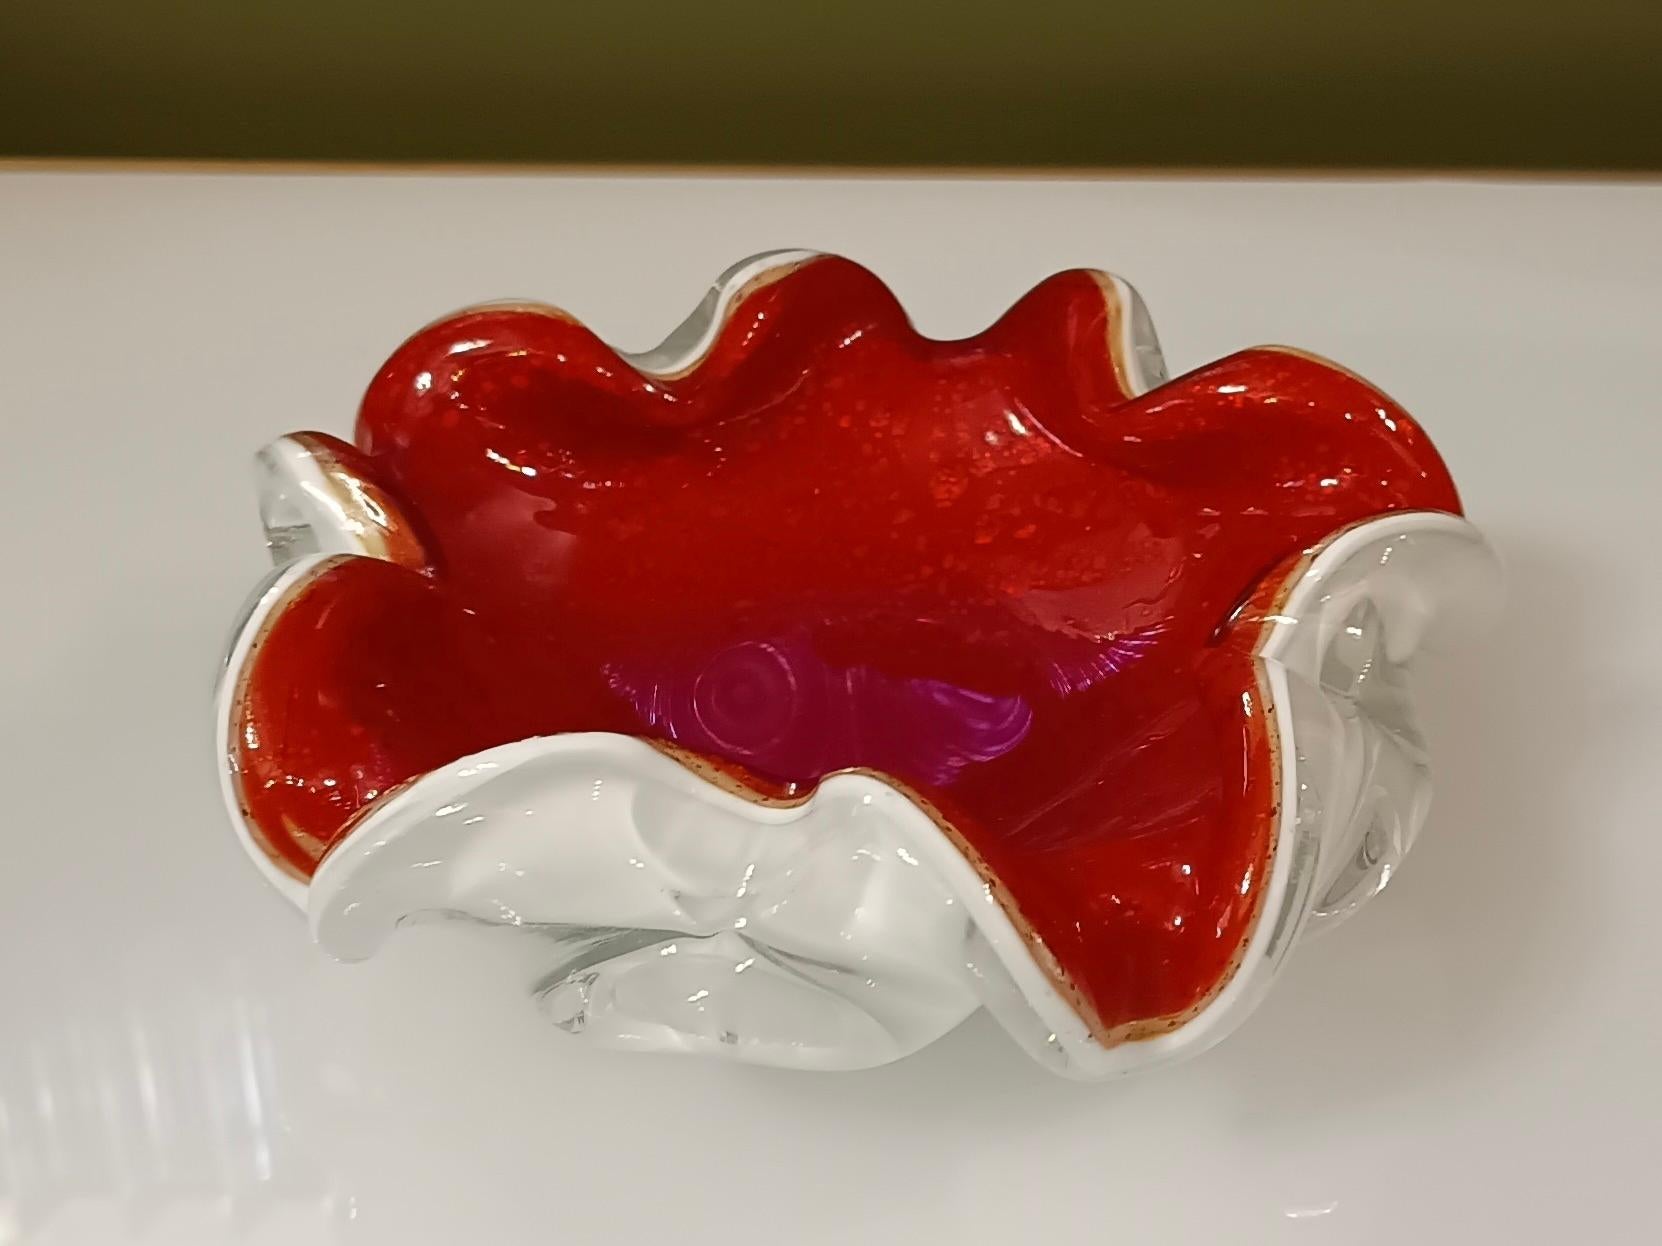 Ashtray made of a particular submerged glass, with a wonderful double color of red and white. Refinement and class as in the Murano style, one-of-a-kind pieces that always remain precious.

The ashtray is made of Murano glass, square in shape, and